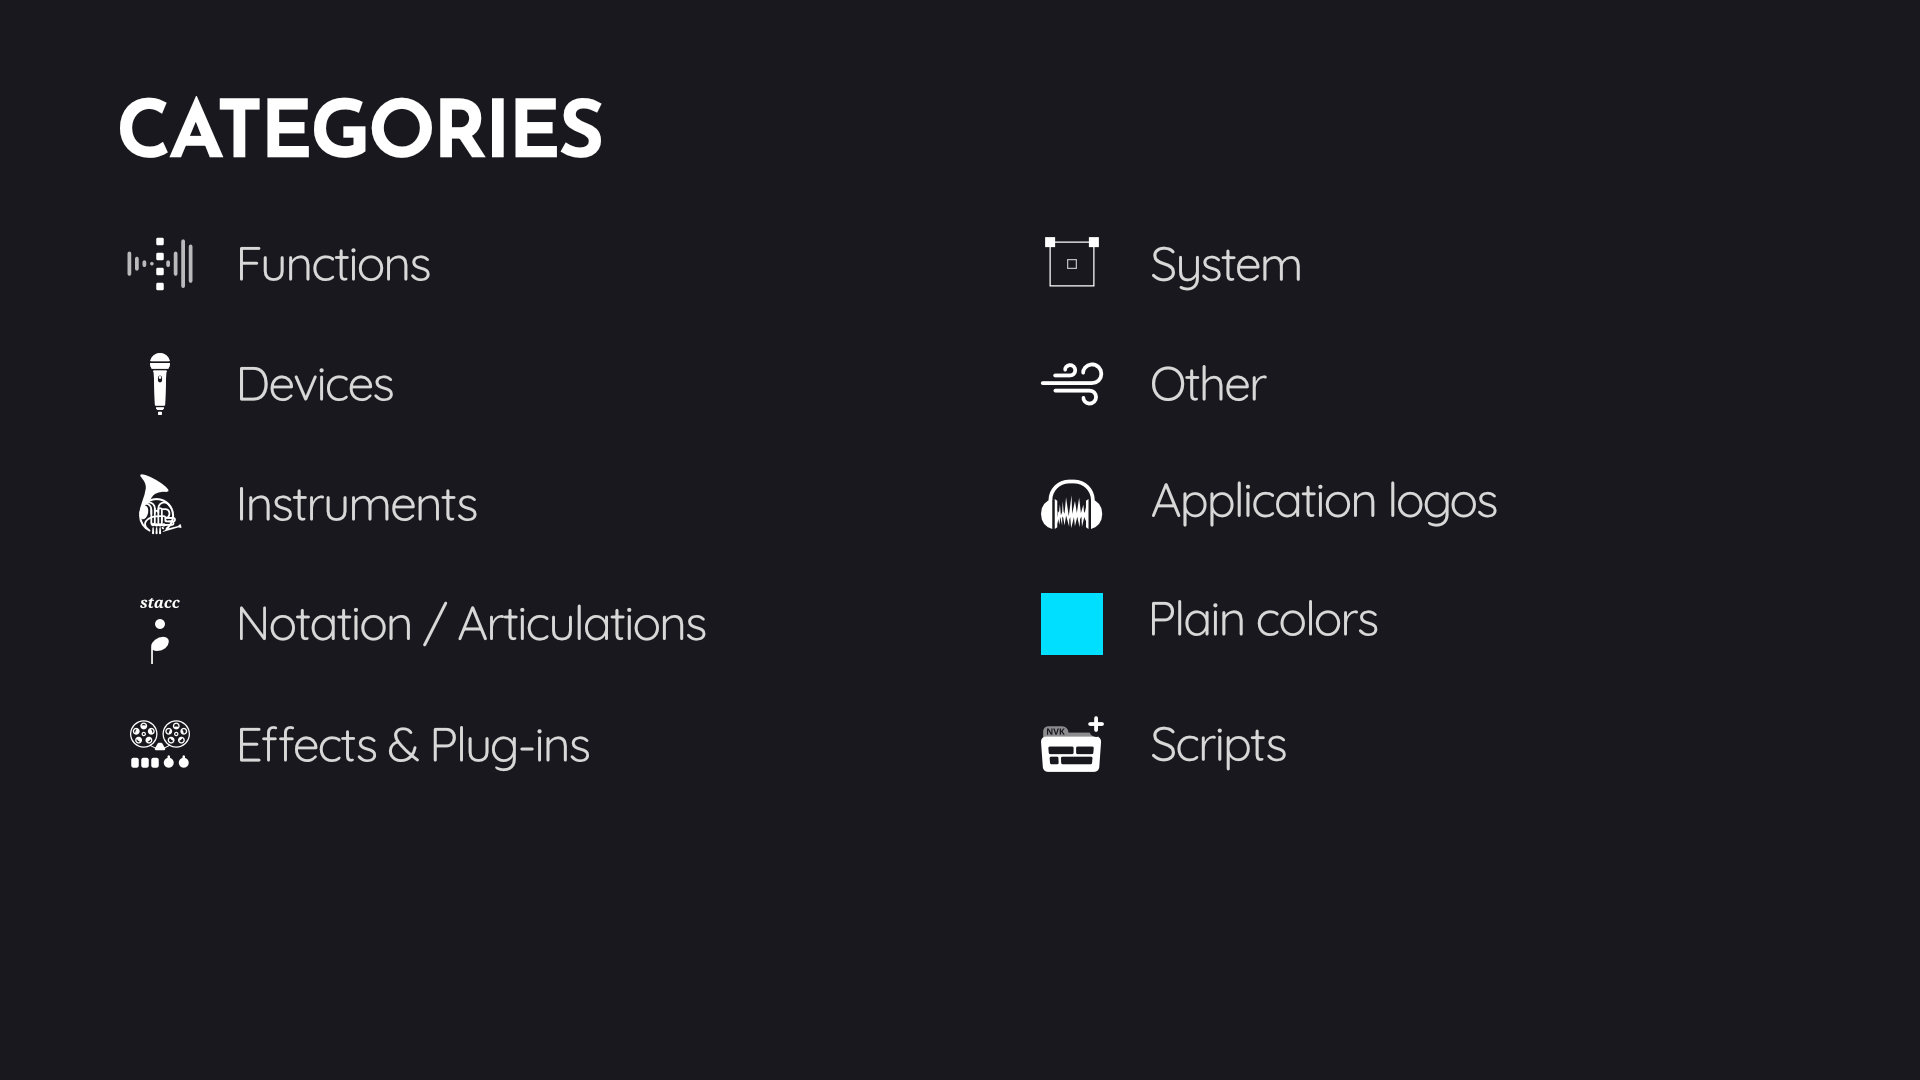 Icon categories. Functions, Devices, Instruments, Notation/Articualtions, Effects & Plug-ins, System, Other, Application logos, Plain colors, Scripts.